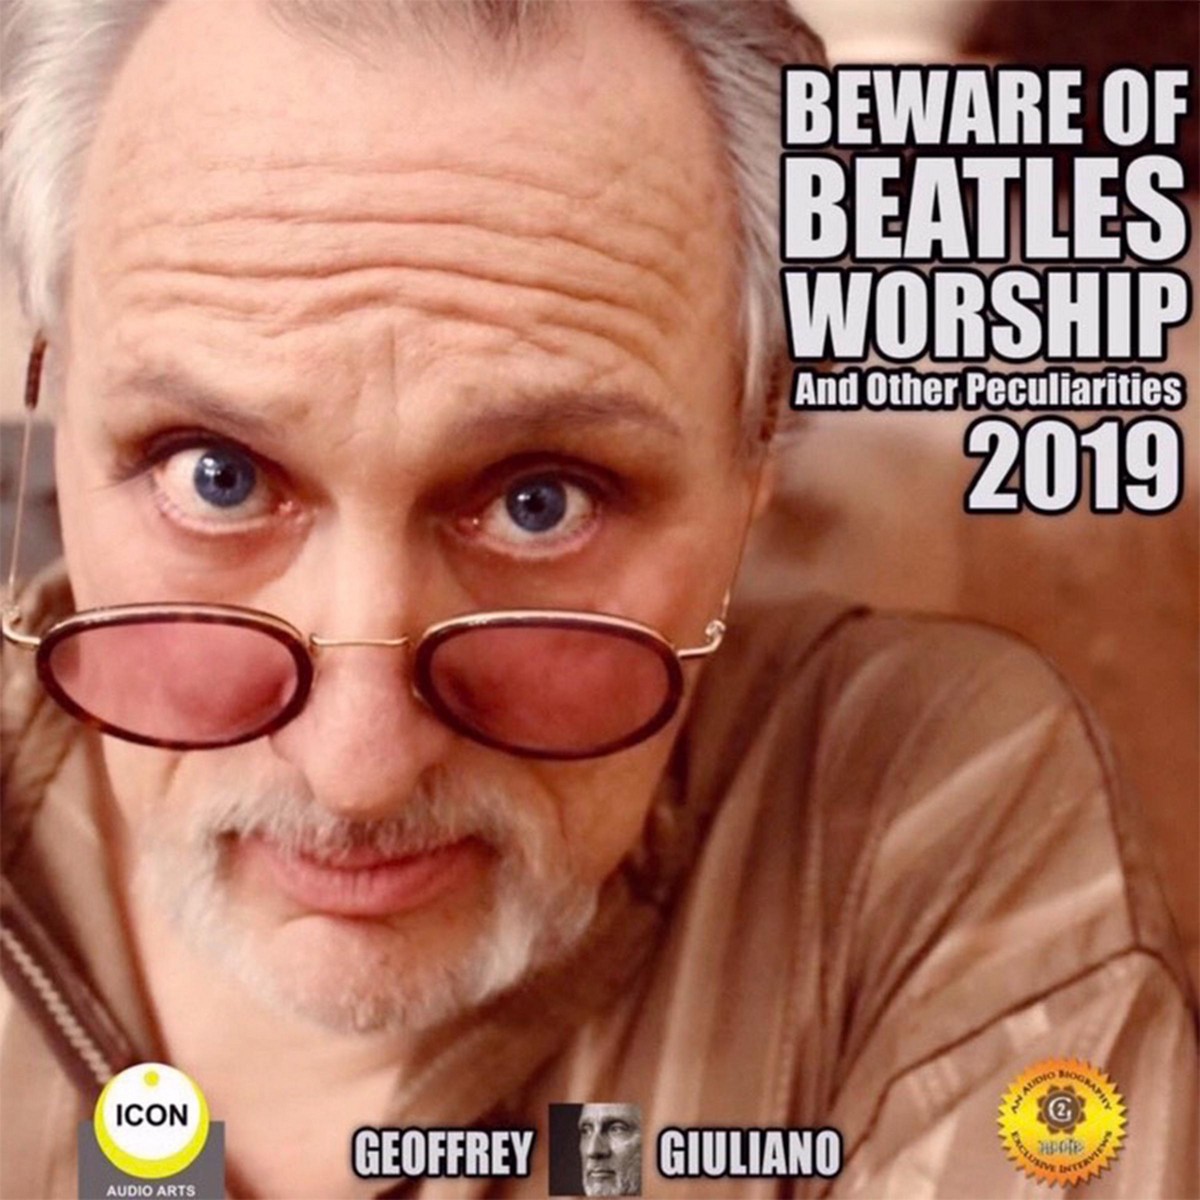 Beware of Beatles Worship and other Peculiarities 2019